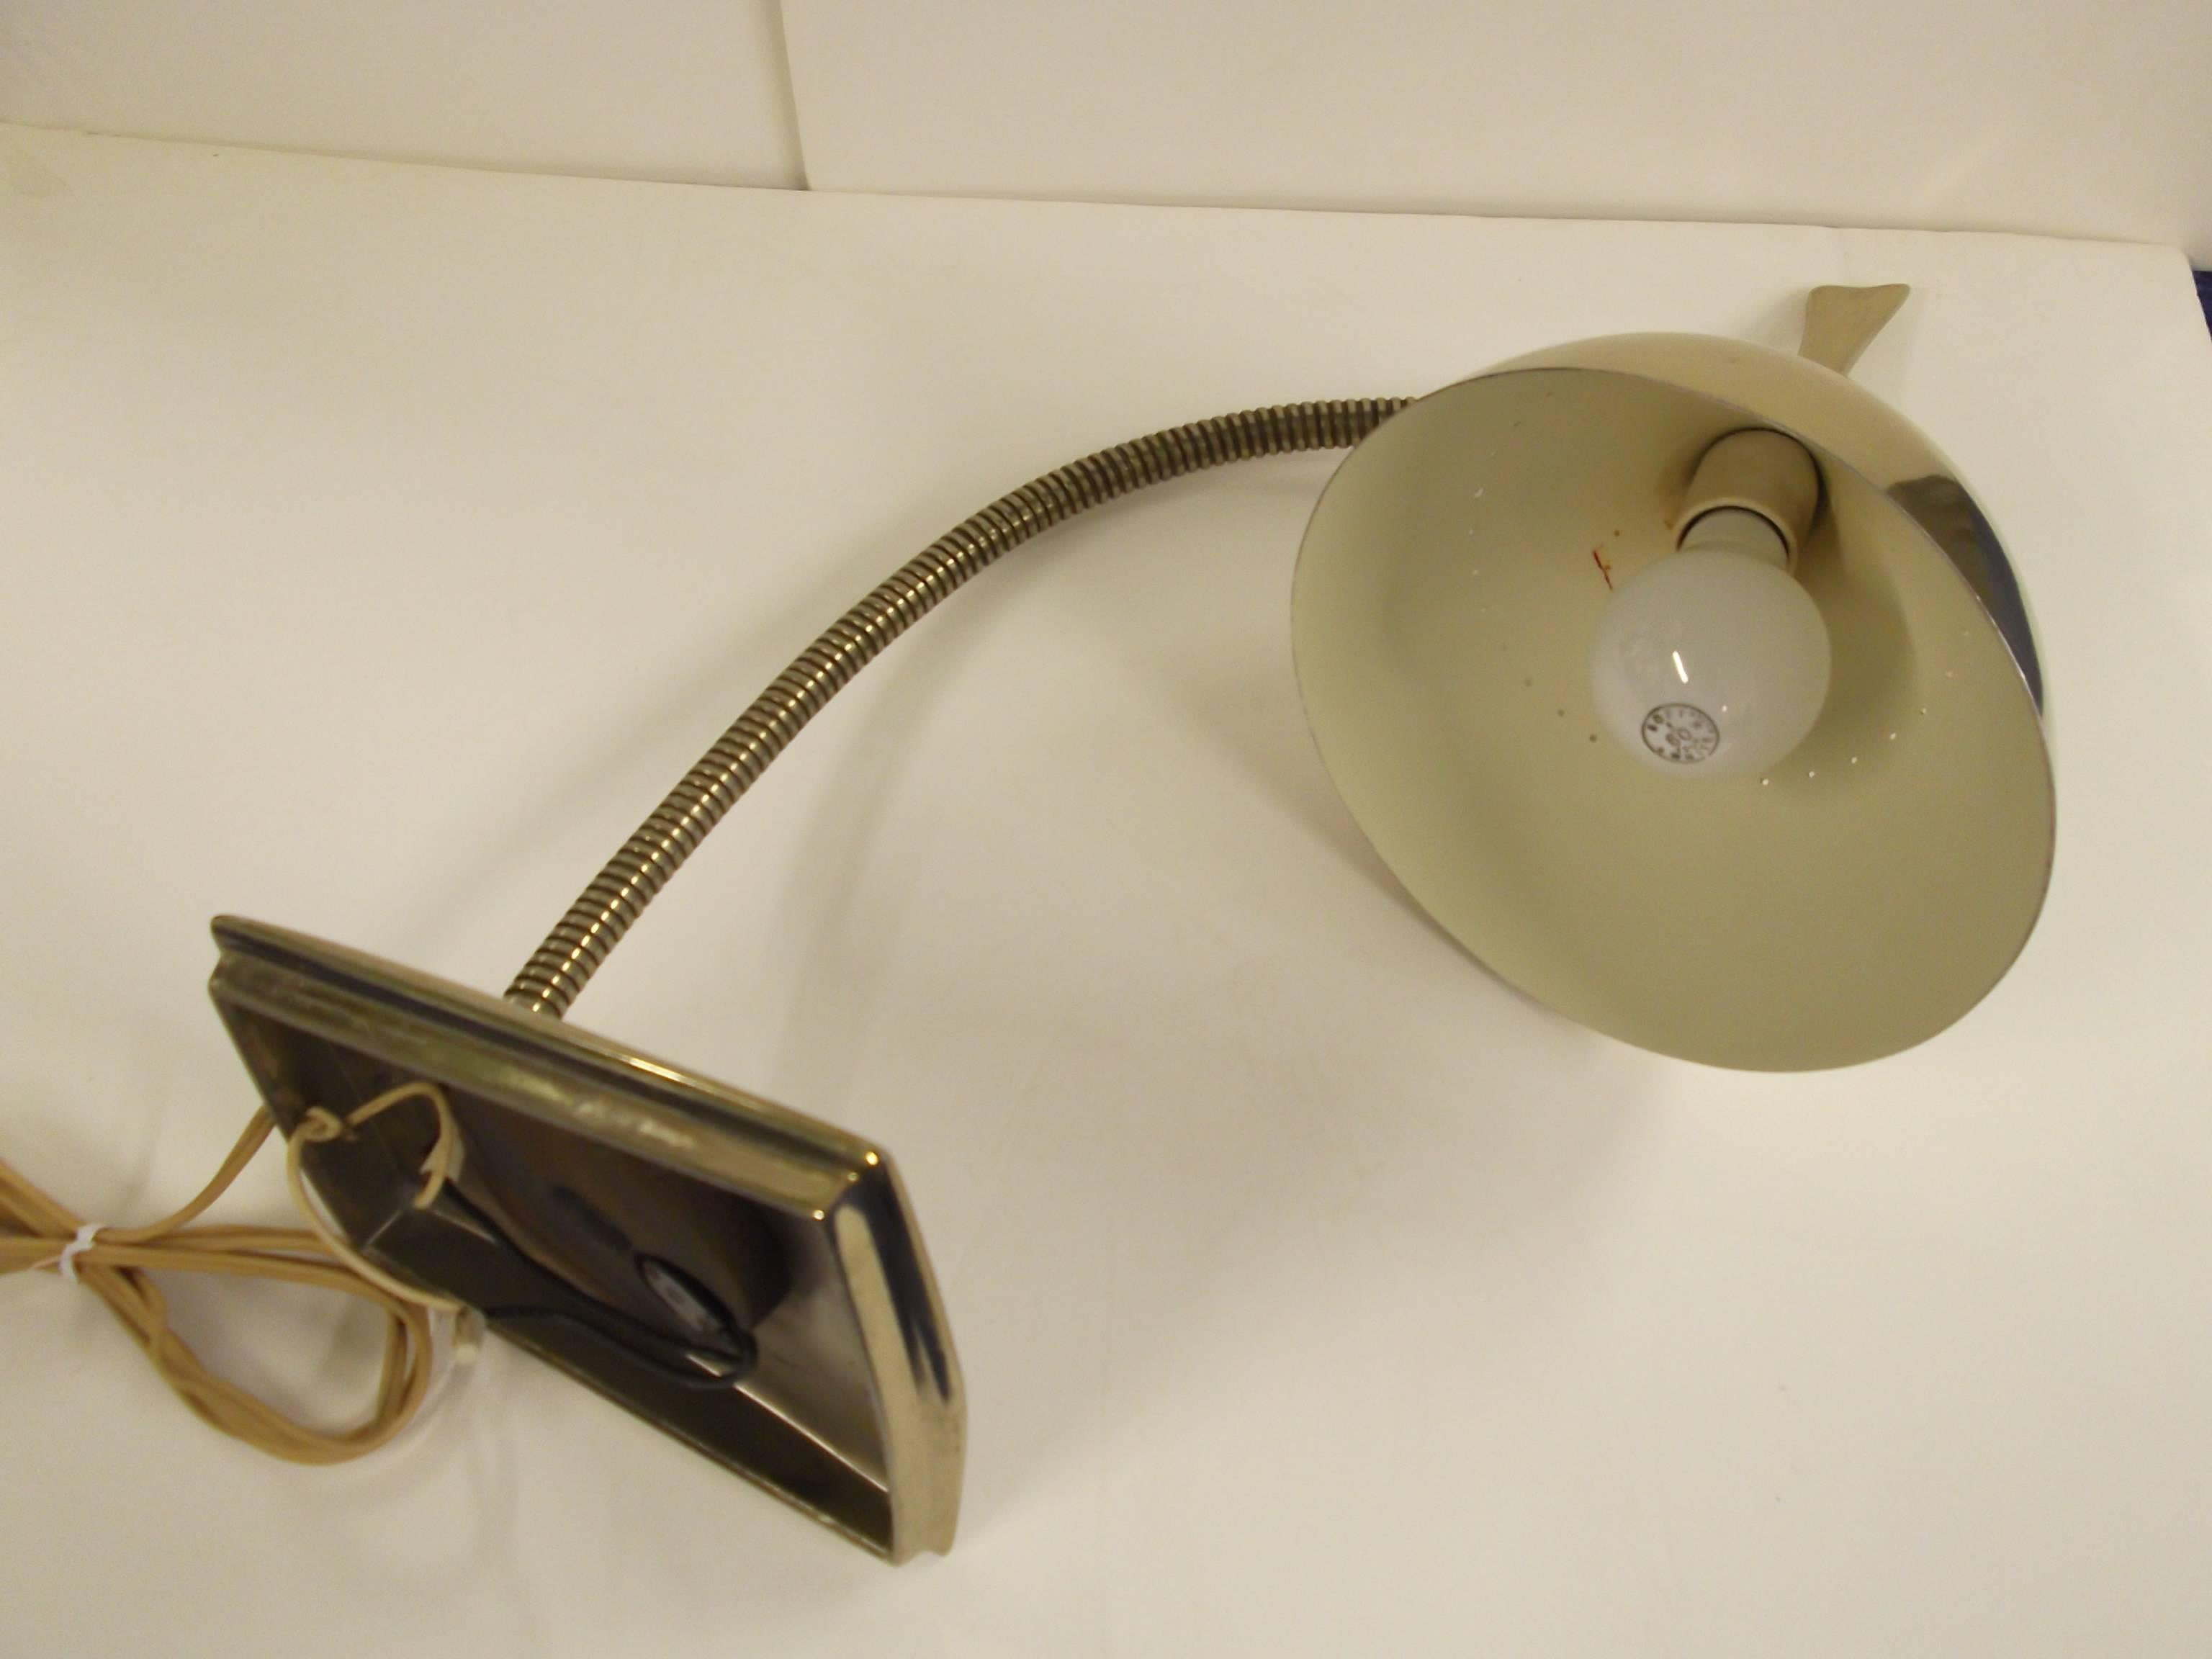 This is one of the hardest laurel desk lamps to find. It is in brass with an asymmetrical shade that has an extended flattened brass handle. The shade can pivot in any direction on a ball socket, even as an up light. The shade has a row of